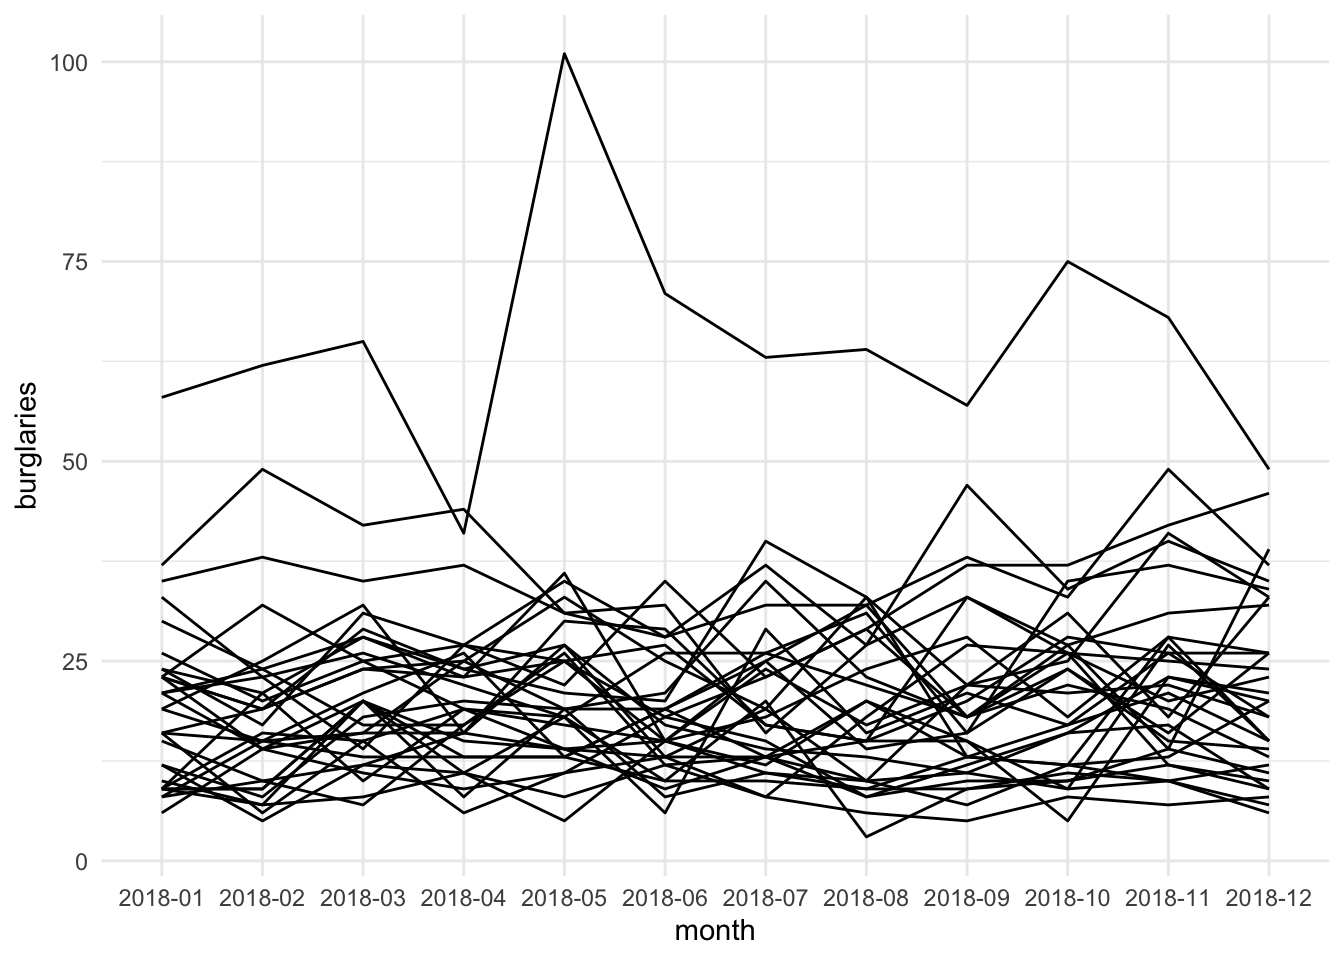 Many line charts in one plot, with vertical axis labeled 'burglaries' ranging from zero to one hundred, and horizontal axis labeled 'month', ranging through the months of 2018. Most of the lines form a mess between values of five and thirty, with a few lines rising above this, and one notable line staying above fifty nearly each month.